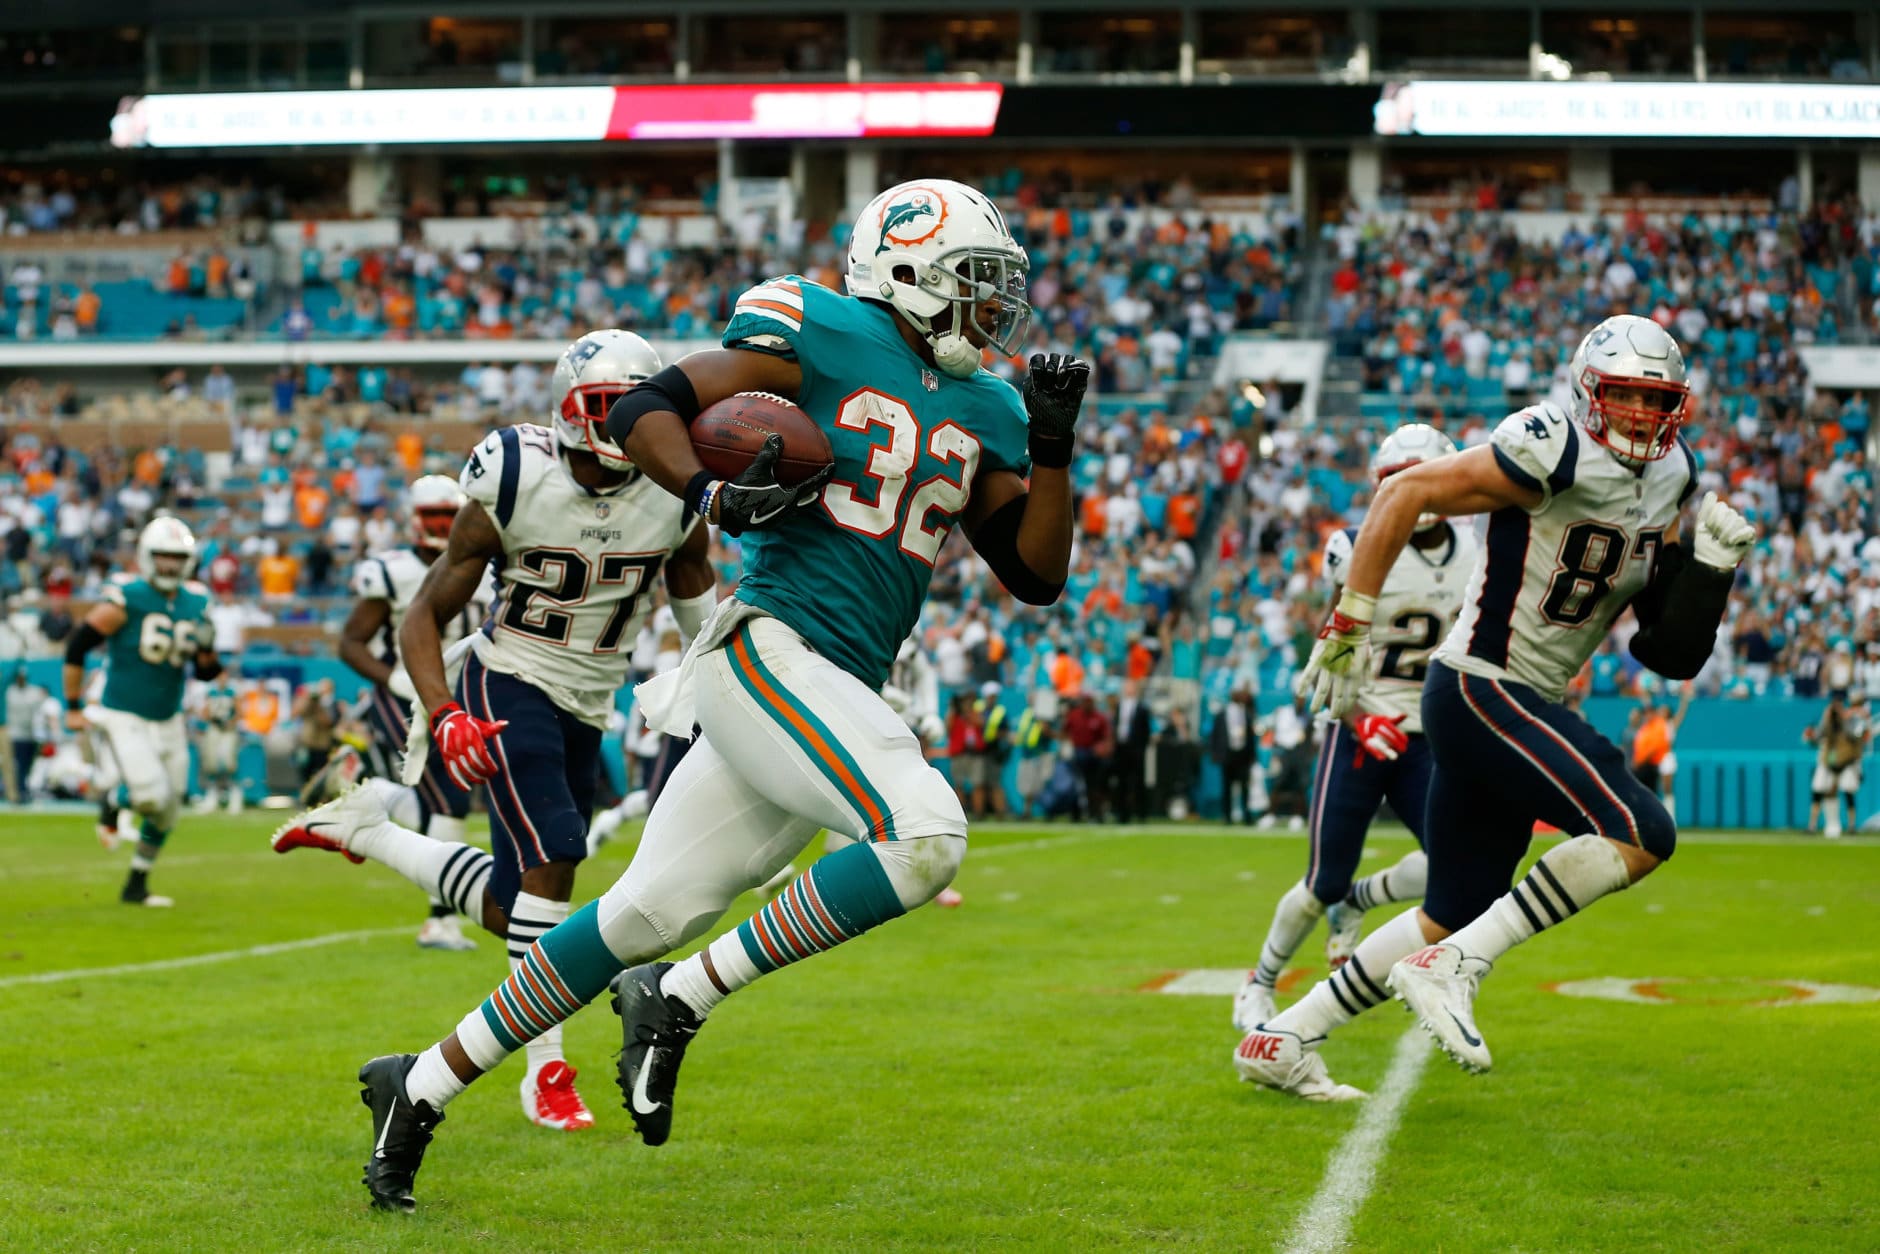 MIAMI, FL - DECEMBER 09: Kenyan Drake #32 of the Miami Dolphins carries the ball for the game winning touchdown during the fourth quarter against the New England Patriots at Hard Rock Stadium on December 9, 2018 in Miami, Florida.  (Photo by Michael Reaves/Getty Images)